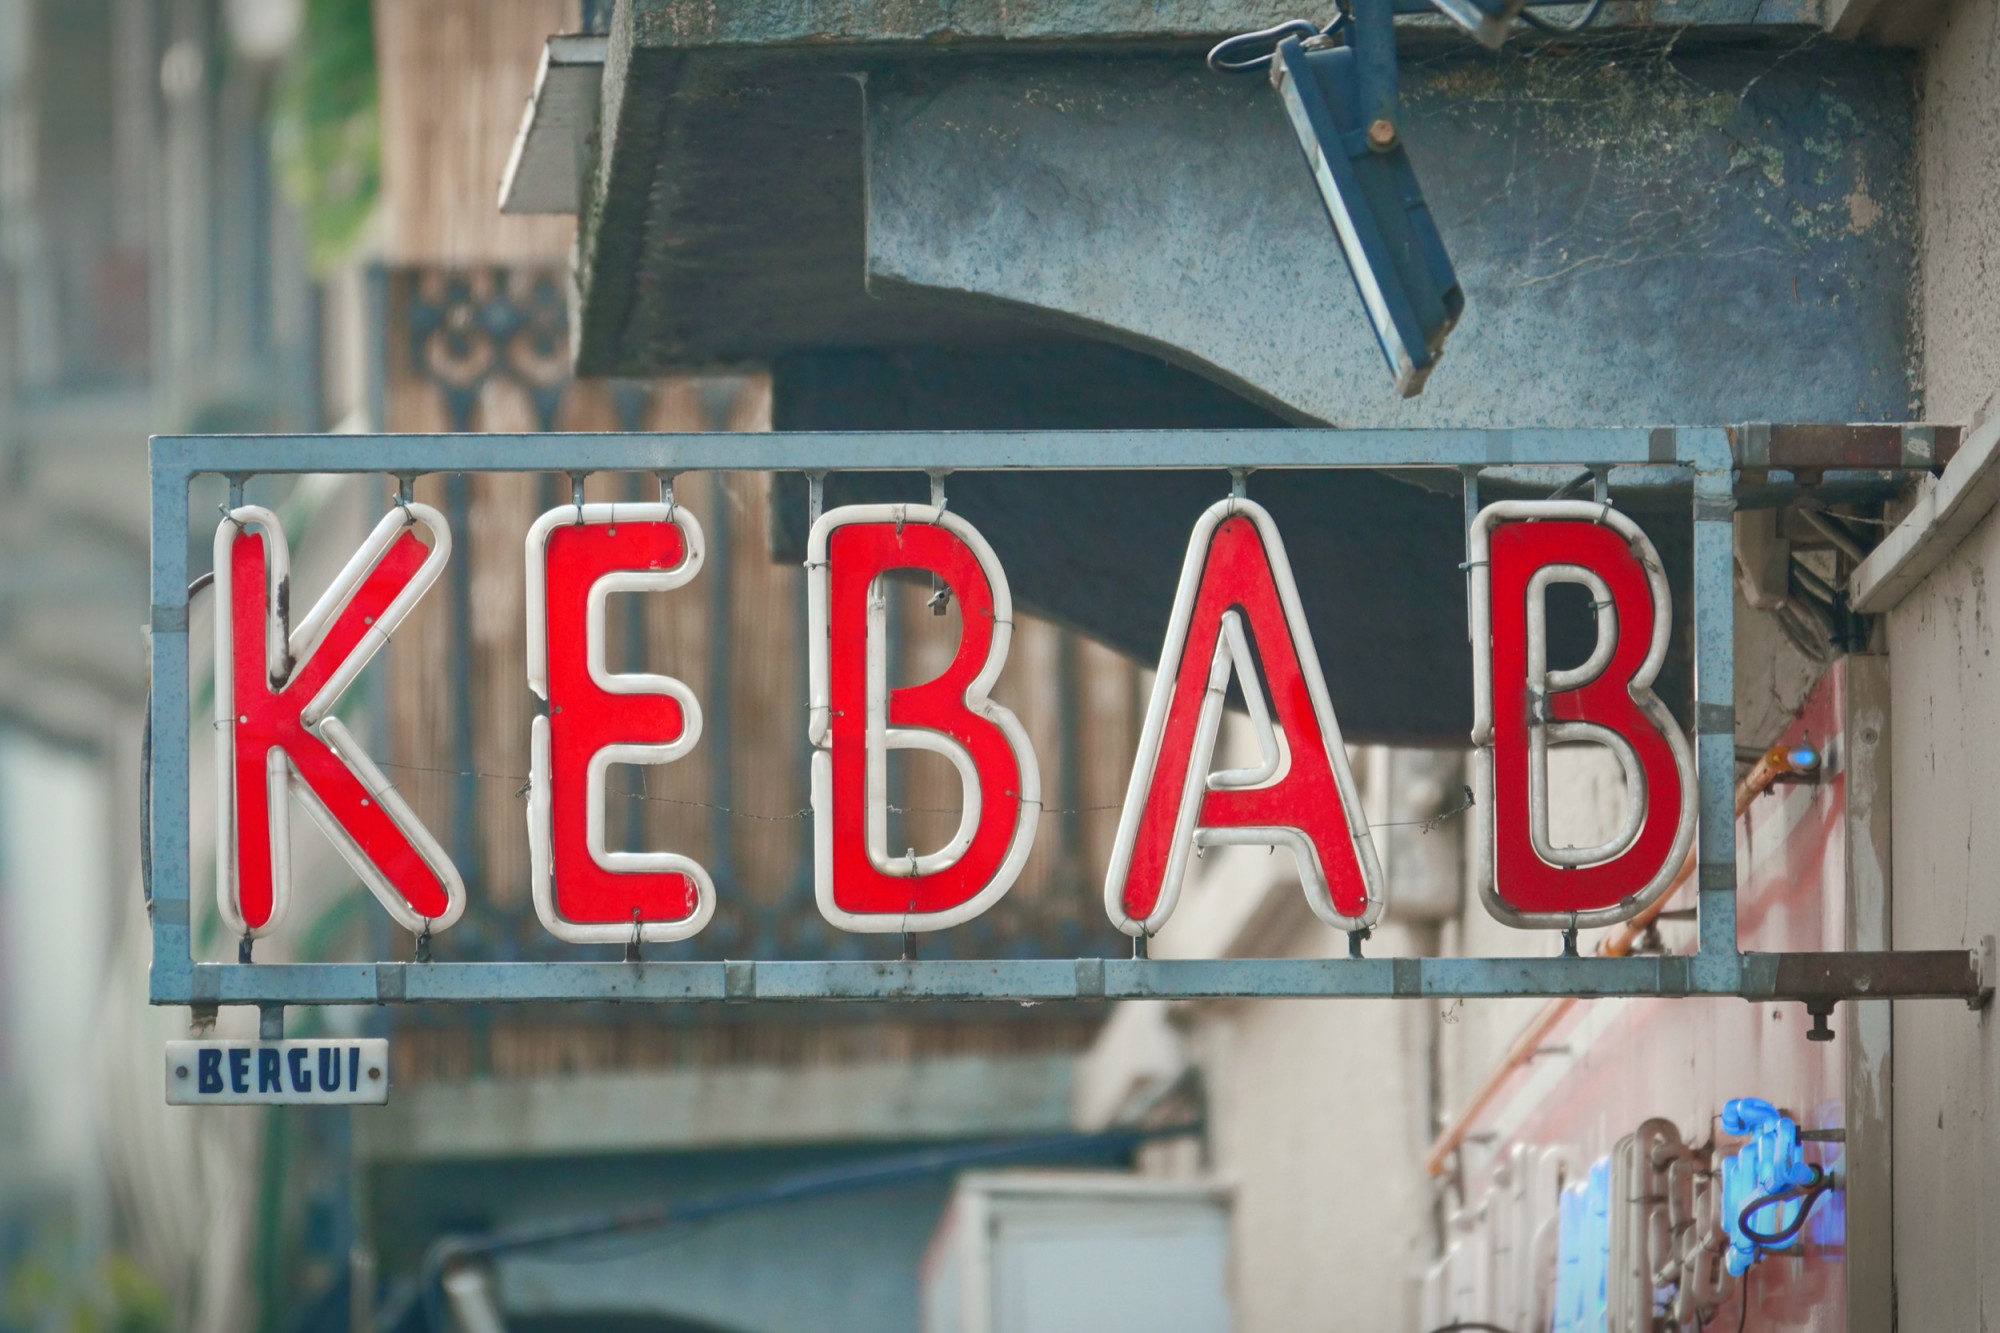 Neon signage for a Kebab shop, Shutterstock.